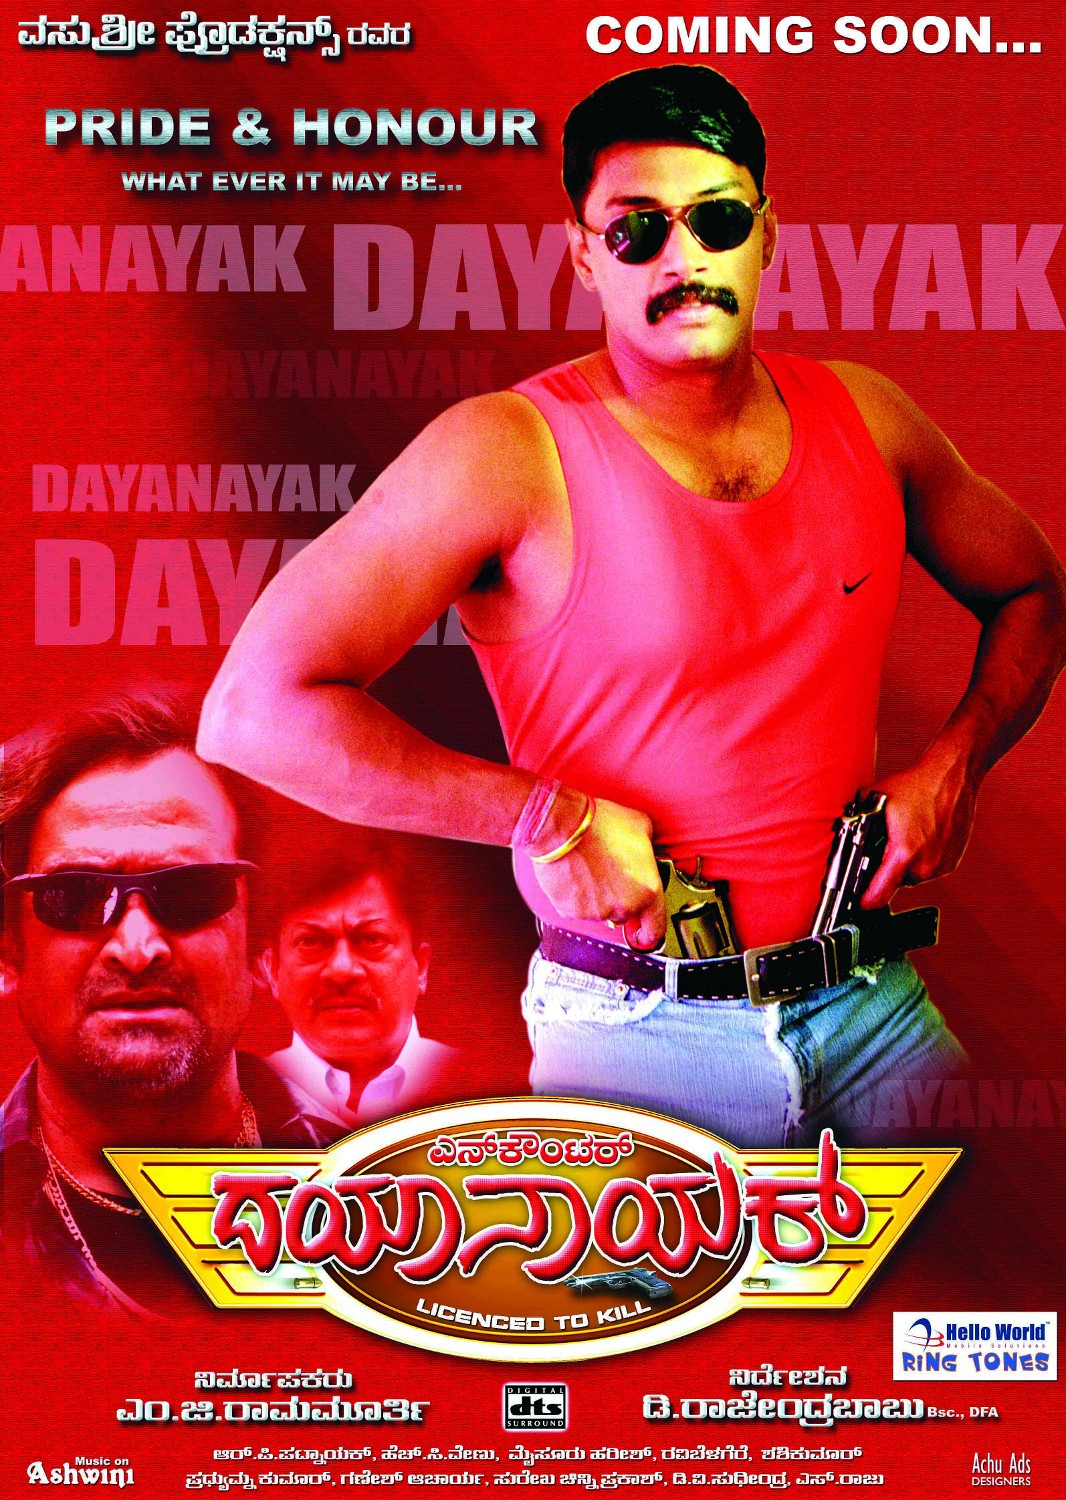 Extra Large Movie Poster Image for Encounter Dayanayak (#17 of 18)